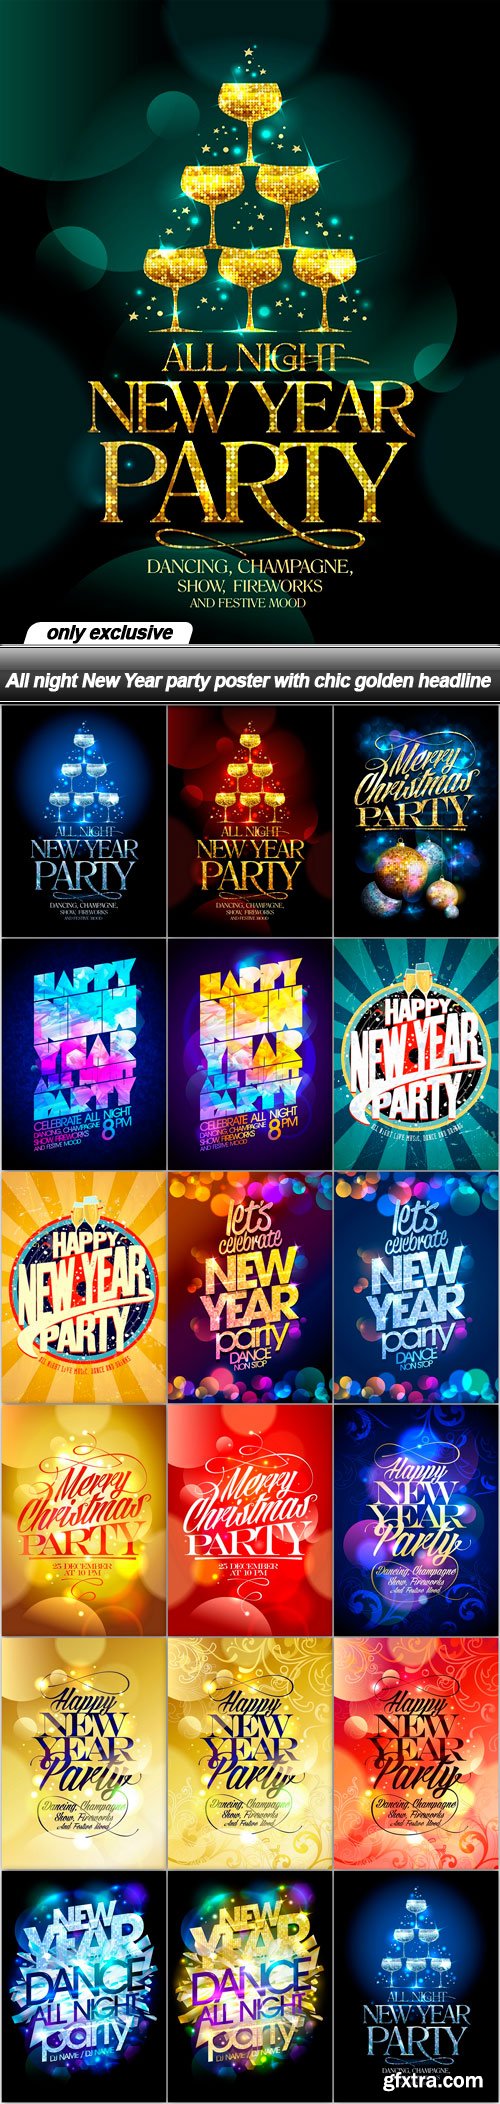 All night New Year party poster with chic golden headline - 18 EPS